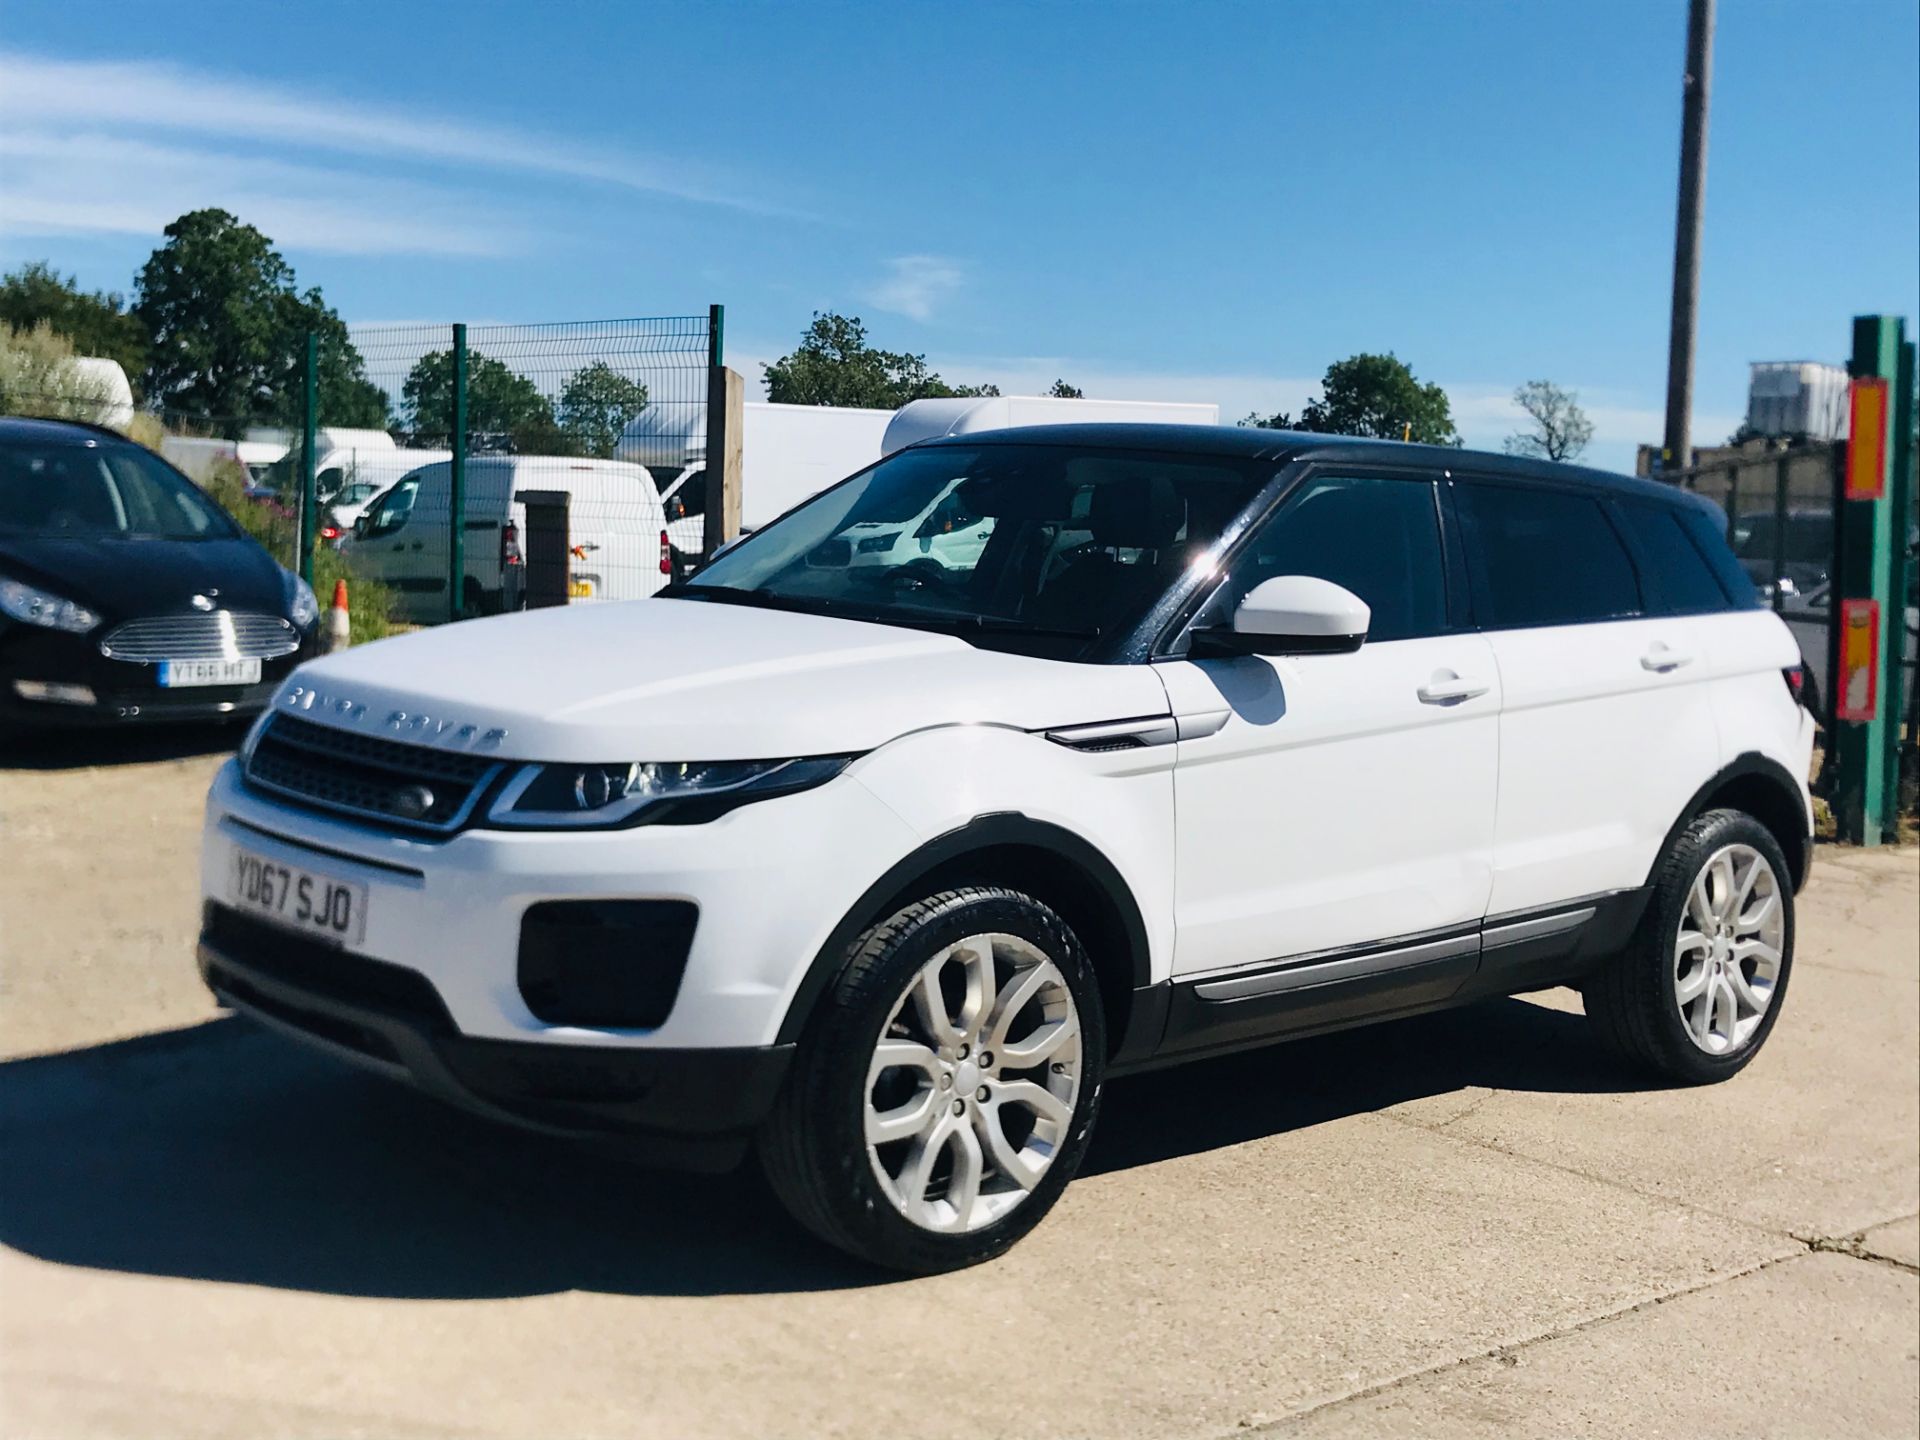 (On Sale) RANGE ROVER EVOQUE *SE* SUV (67 REG) '2.0 ED4 - 150 BHP' *LEATHER & PAN ROOF* (1 OWNER) - Image 5 of 39